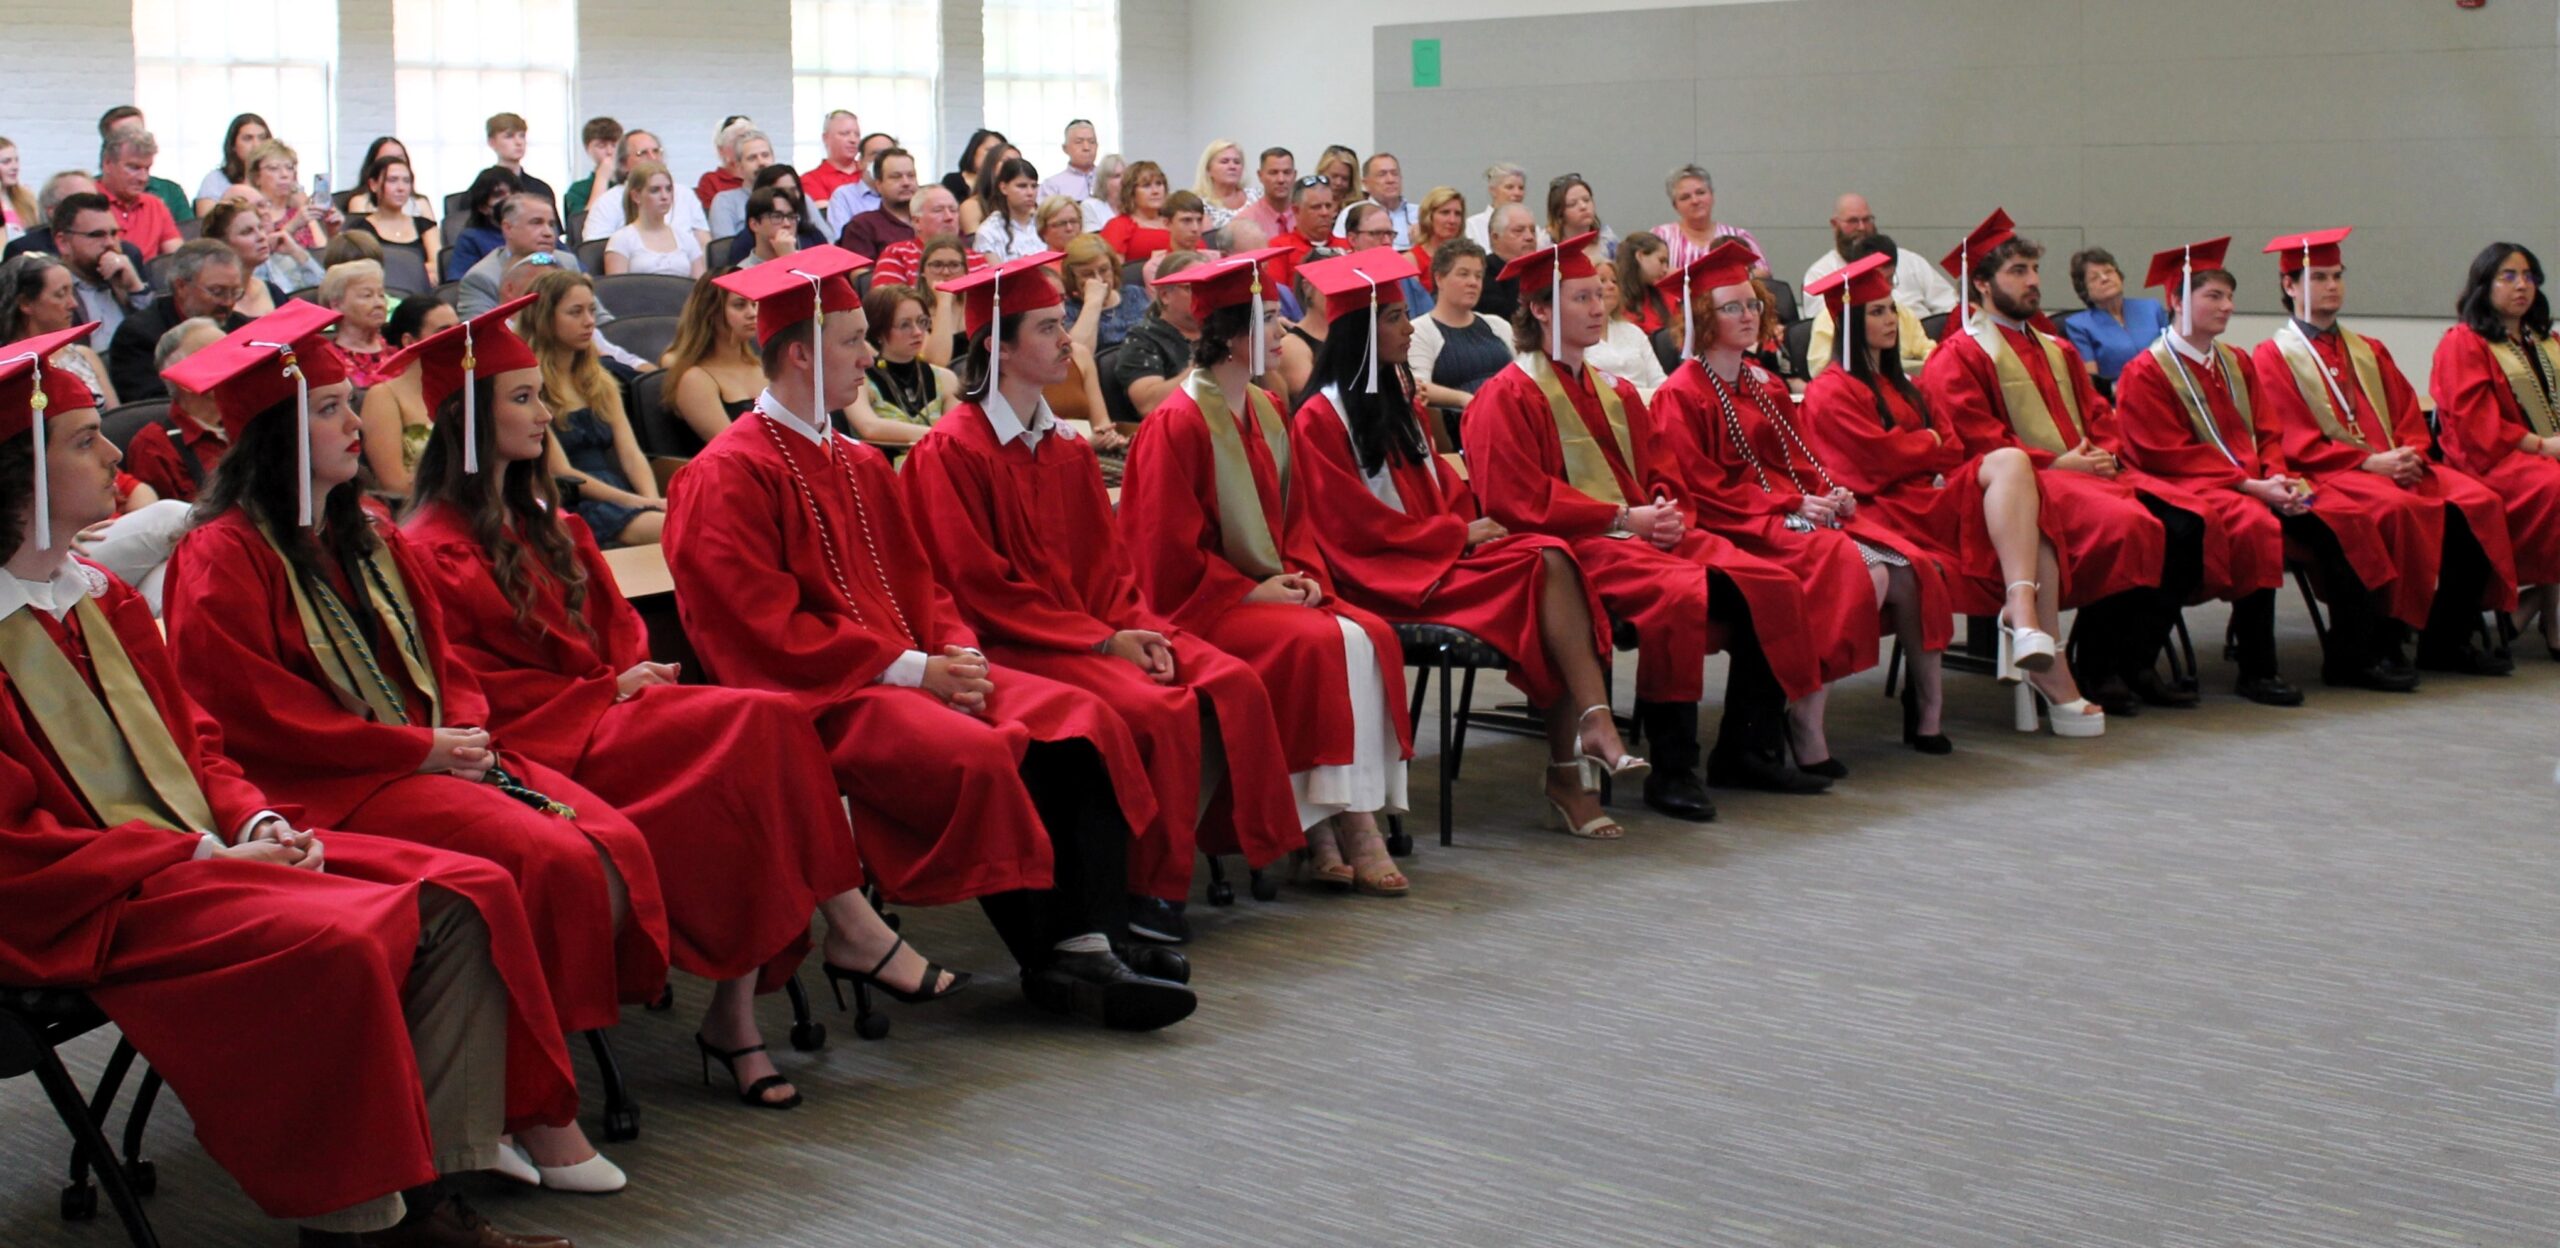 Picture of graduates sitting in front row with audience behind